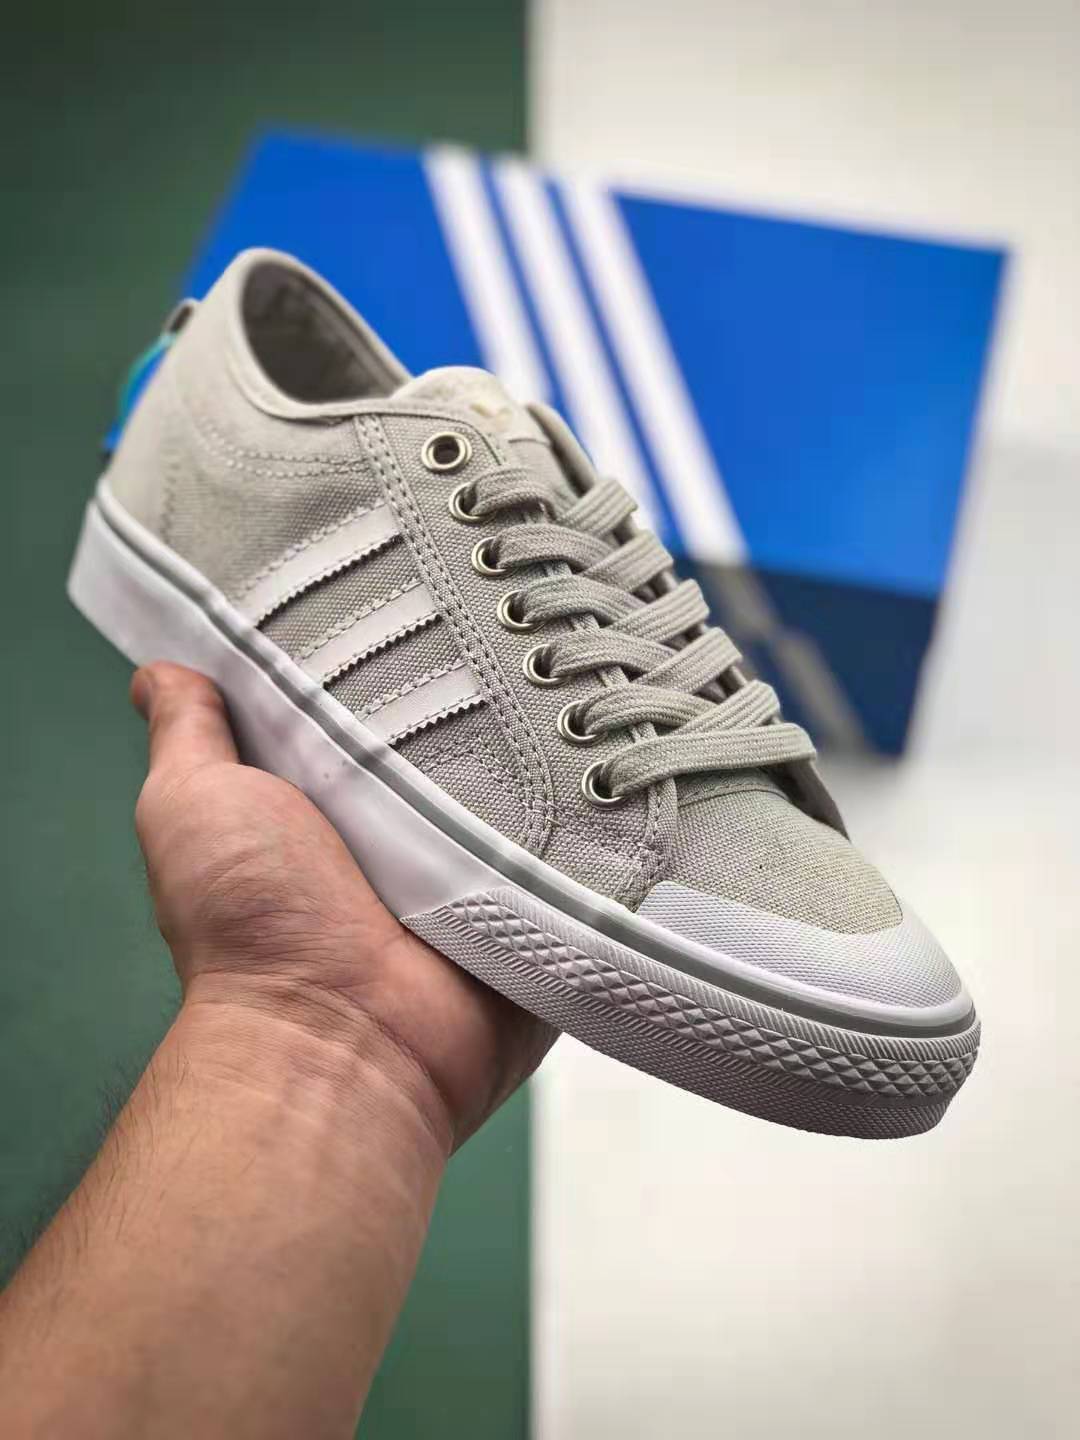 Adidas Originals Nizza Low Gray BZ0498 Sneakers - Stylish and Comfortable